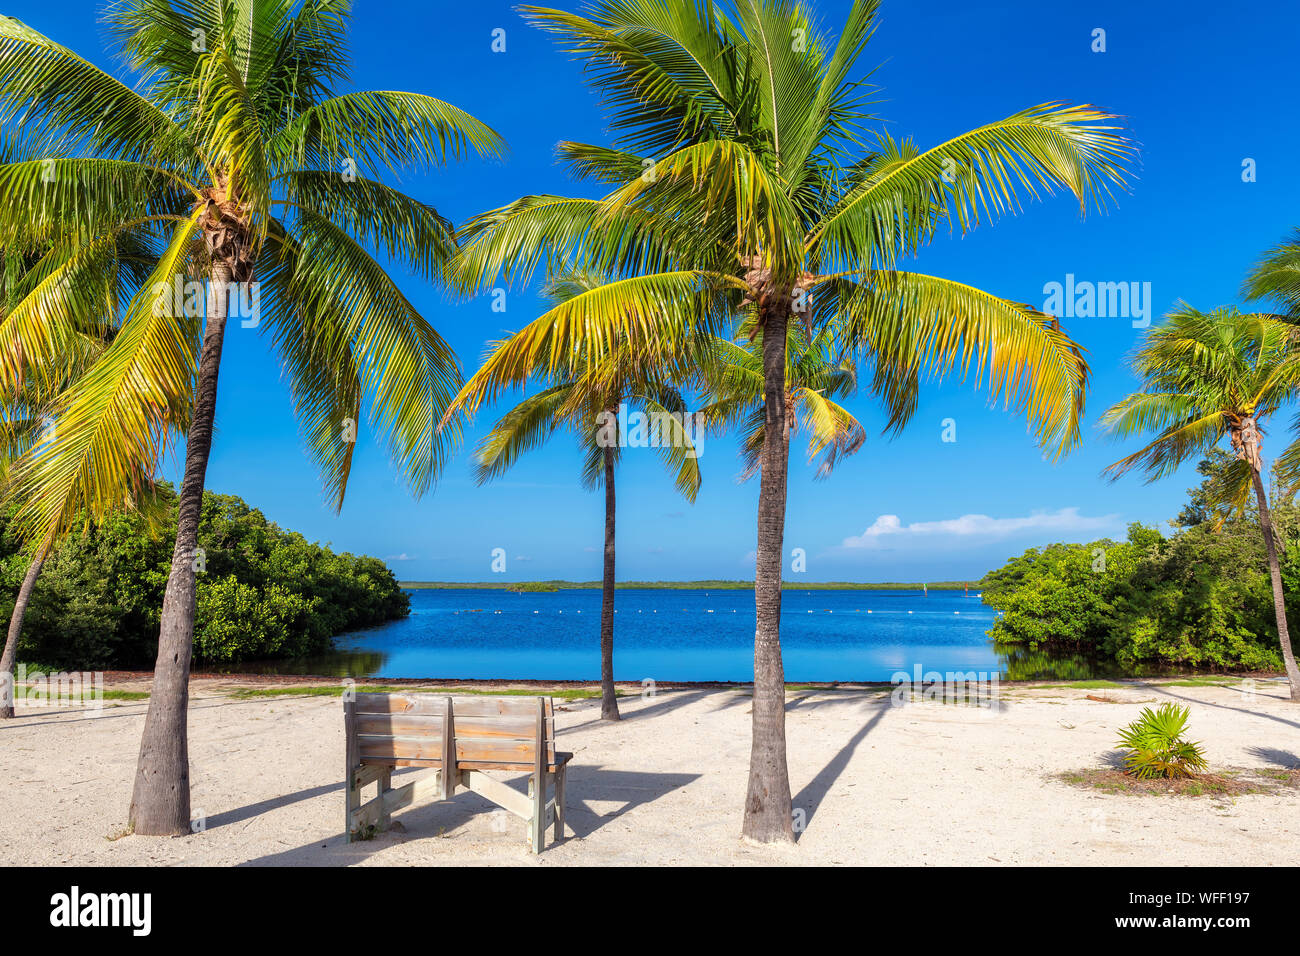 Bench under palm trees on a tropical beach in Florida Keys. Stock Photo